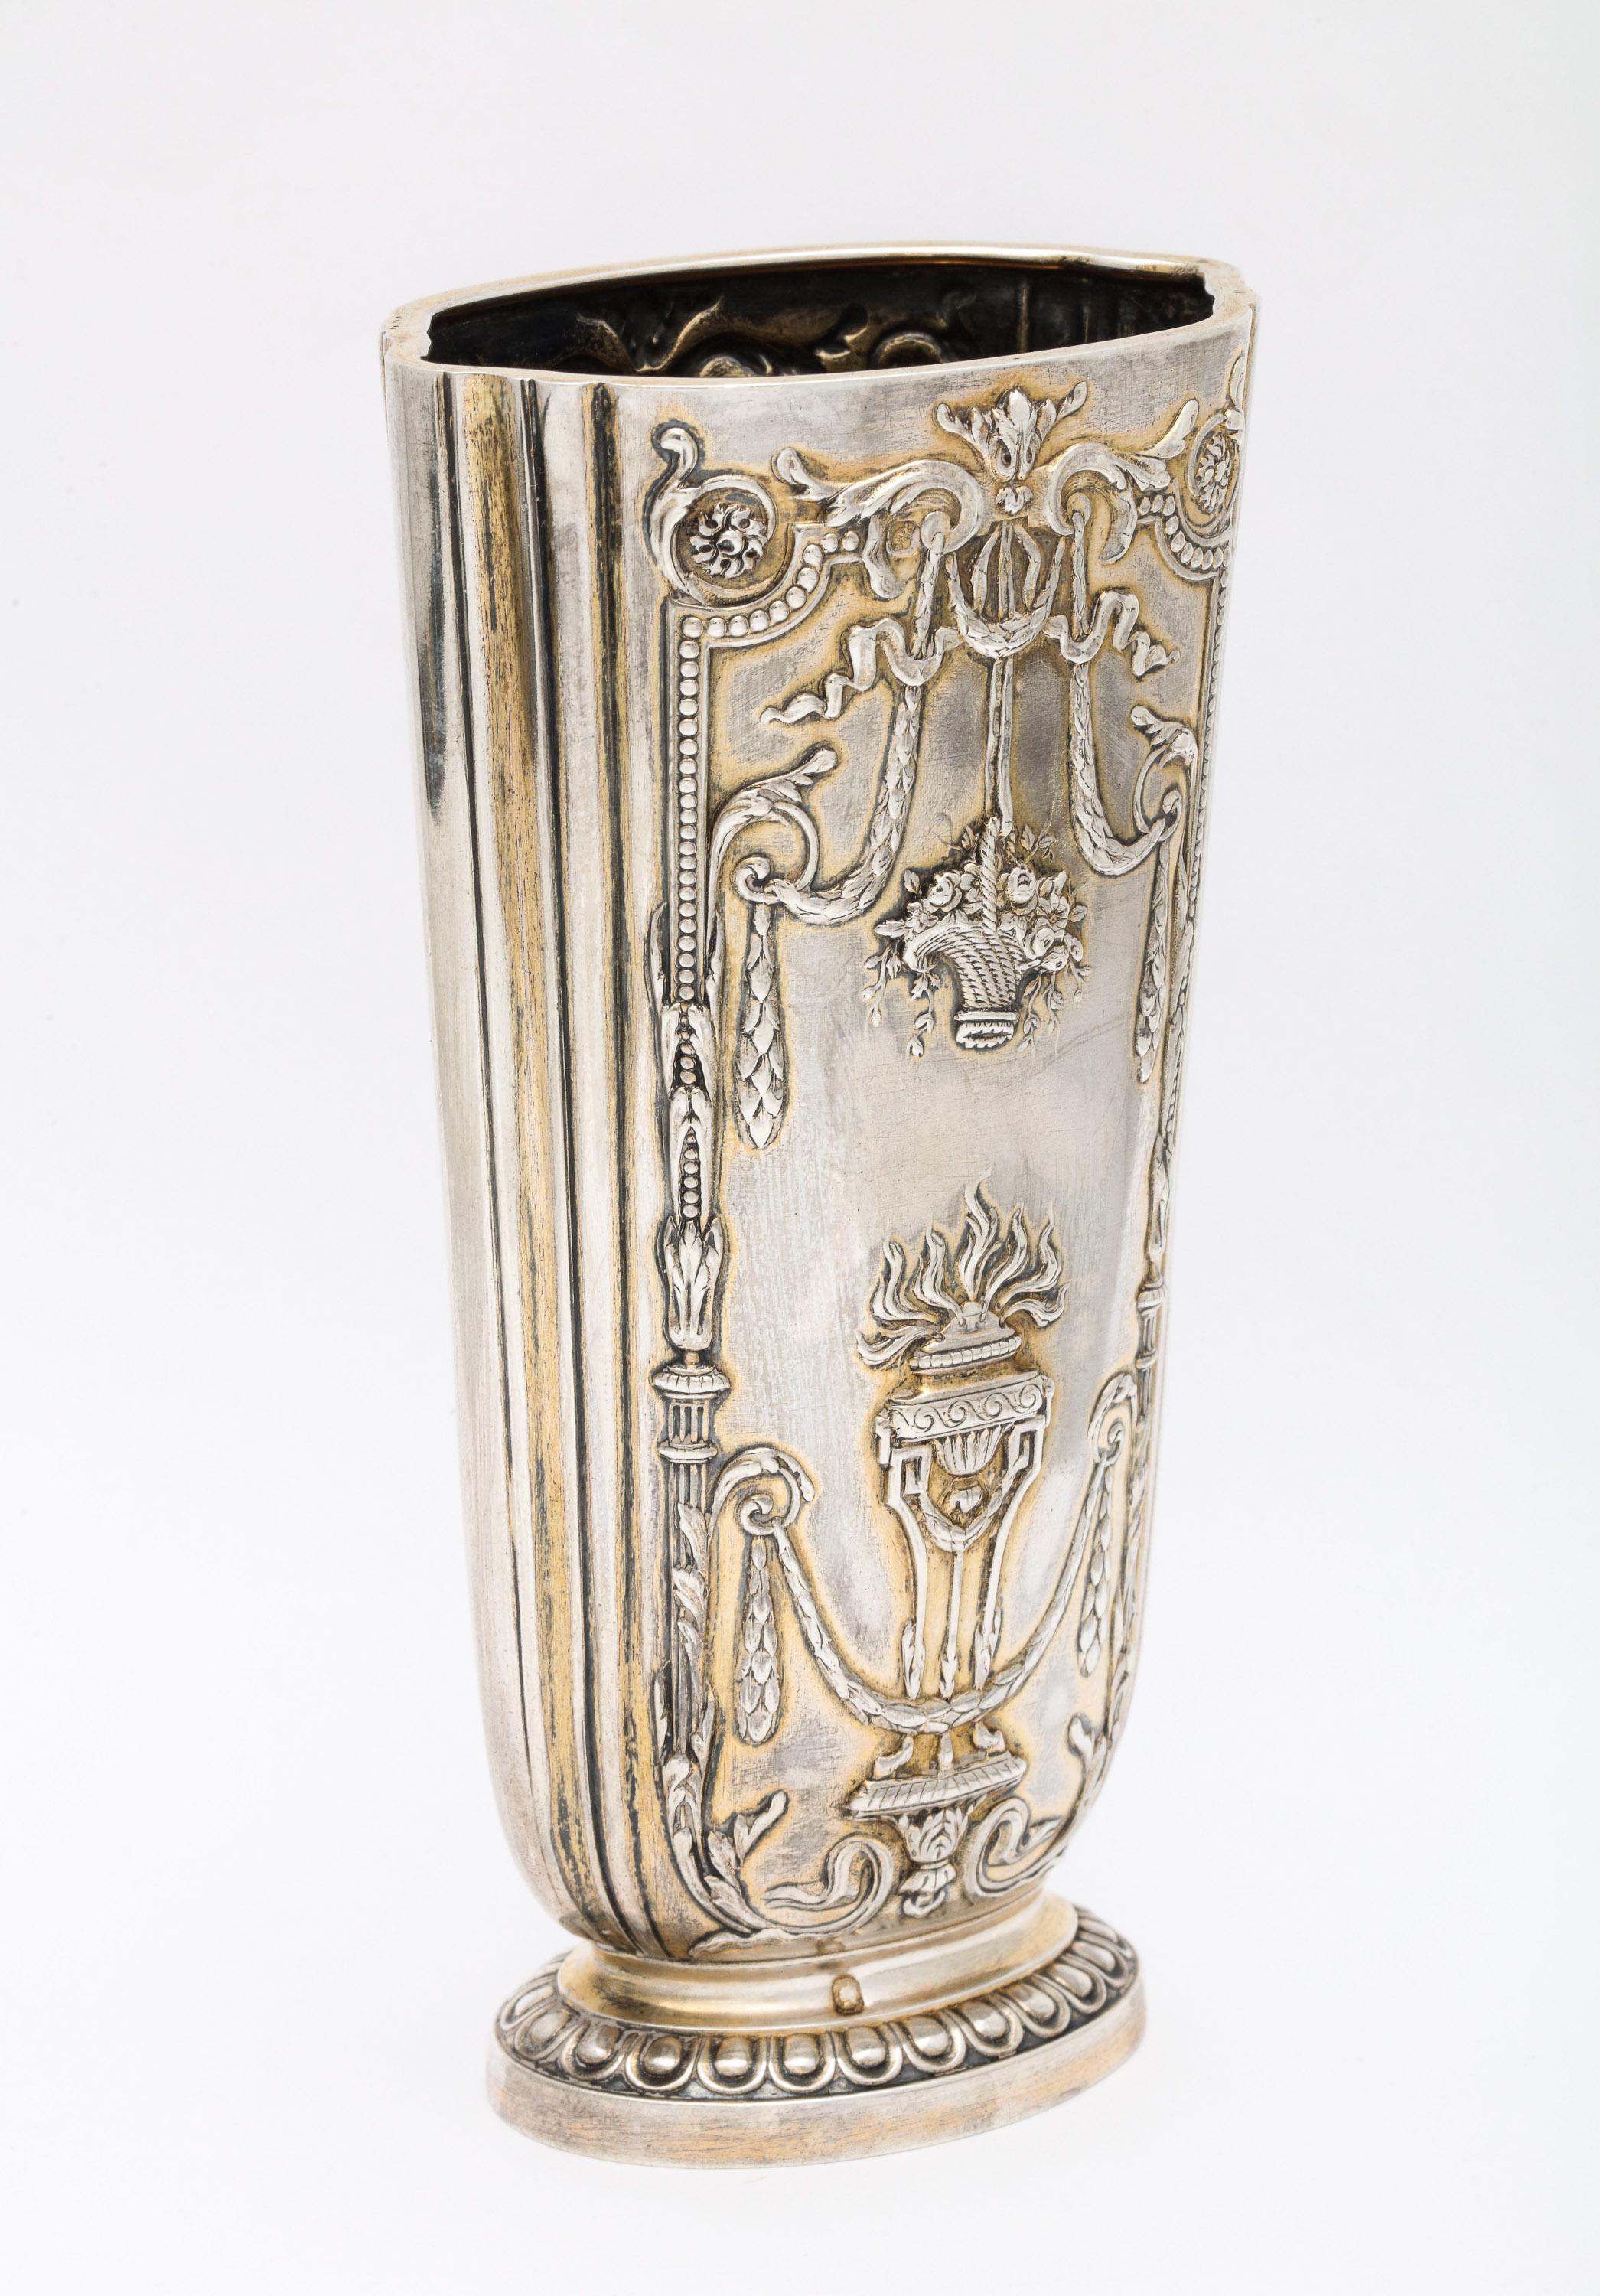 Early 20th Century Edwardian Sterling Silver-Gilt Vase, Paris